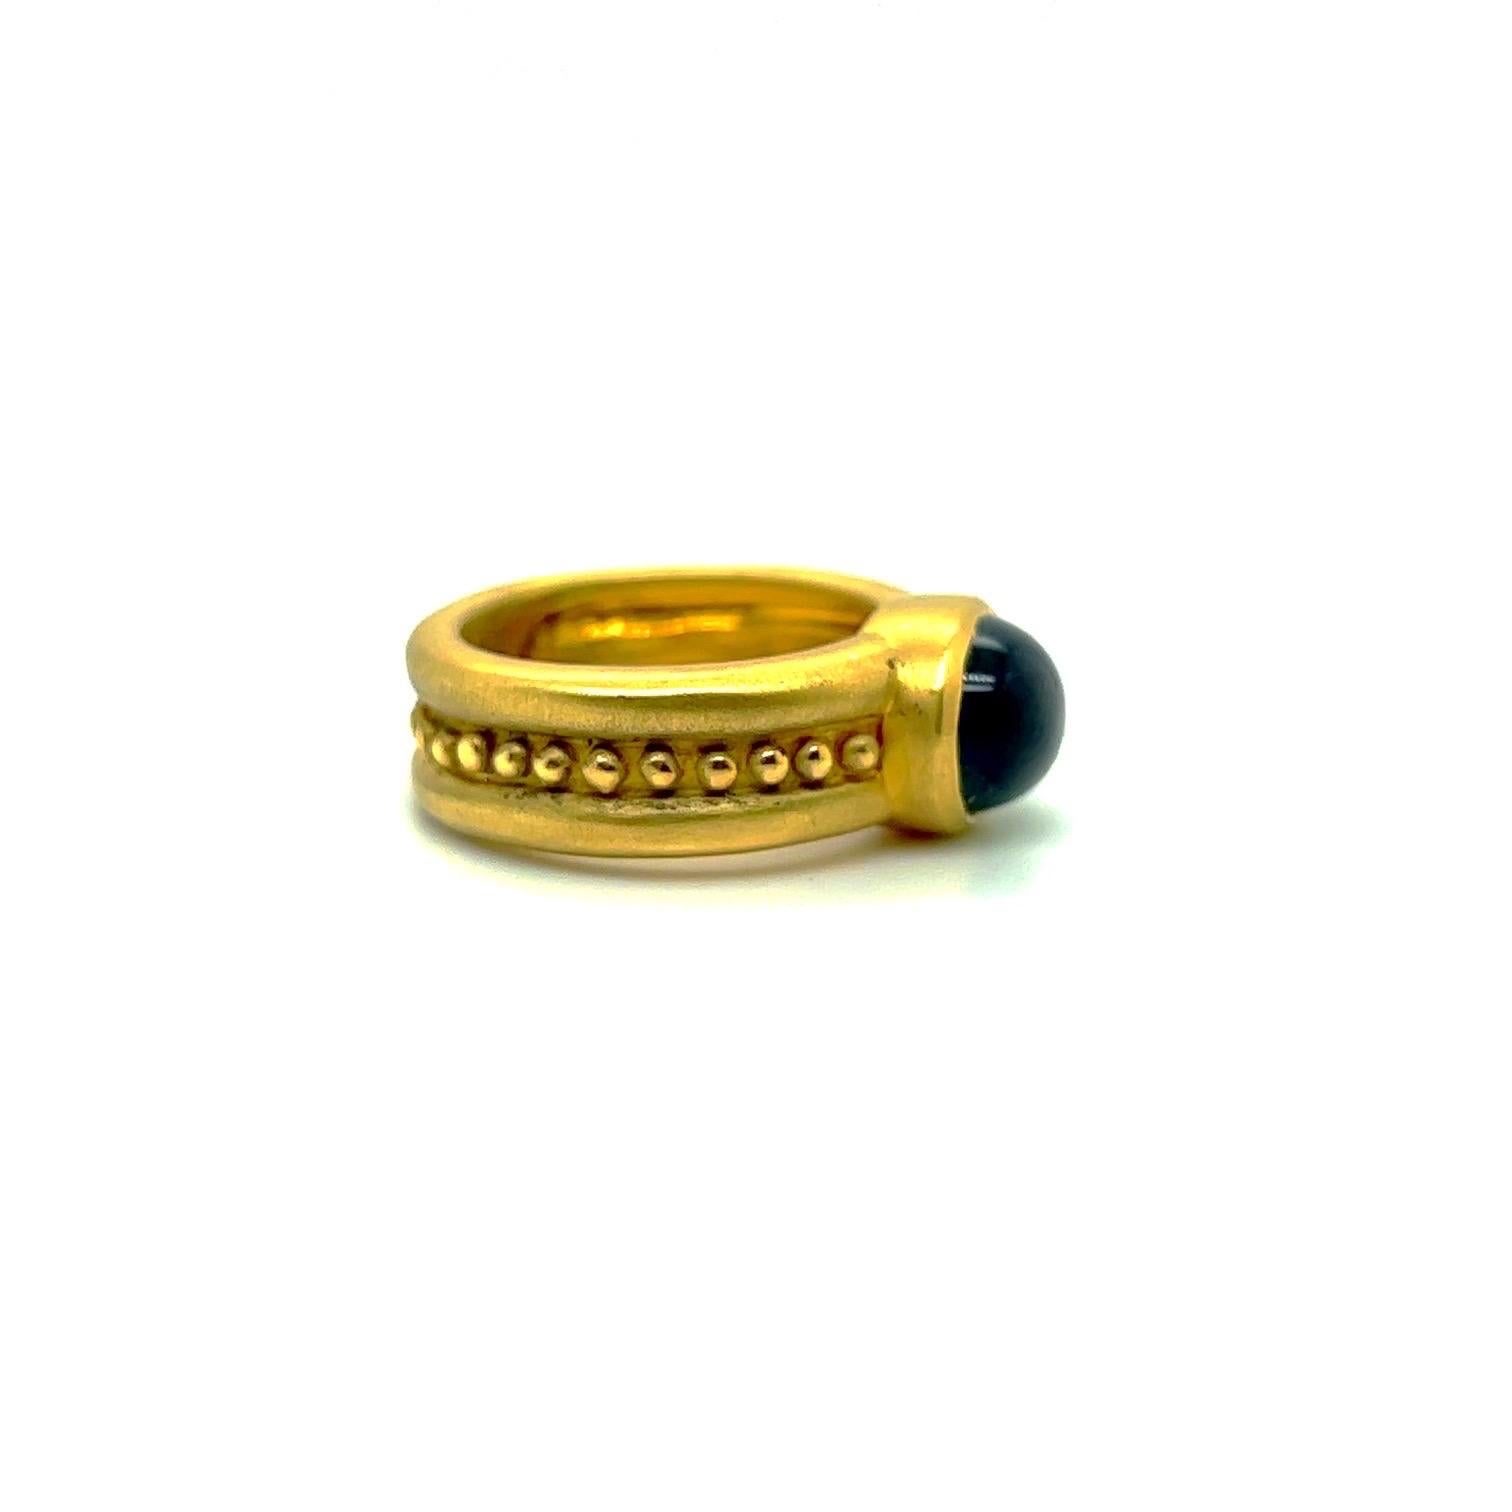 An 18 karat yellow gold ring designed with an oval cabochon green tourmaline center. The stone is set east /west on a matte shank detailed with gold beads.
Stamped 750
Finger size 6.5